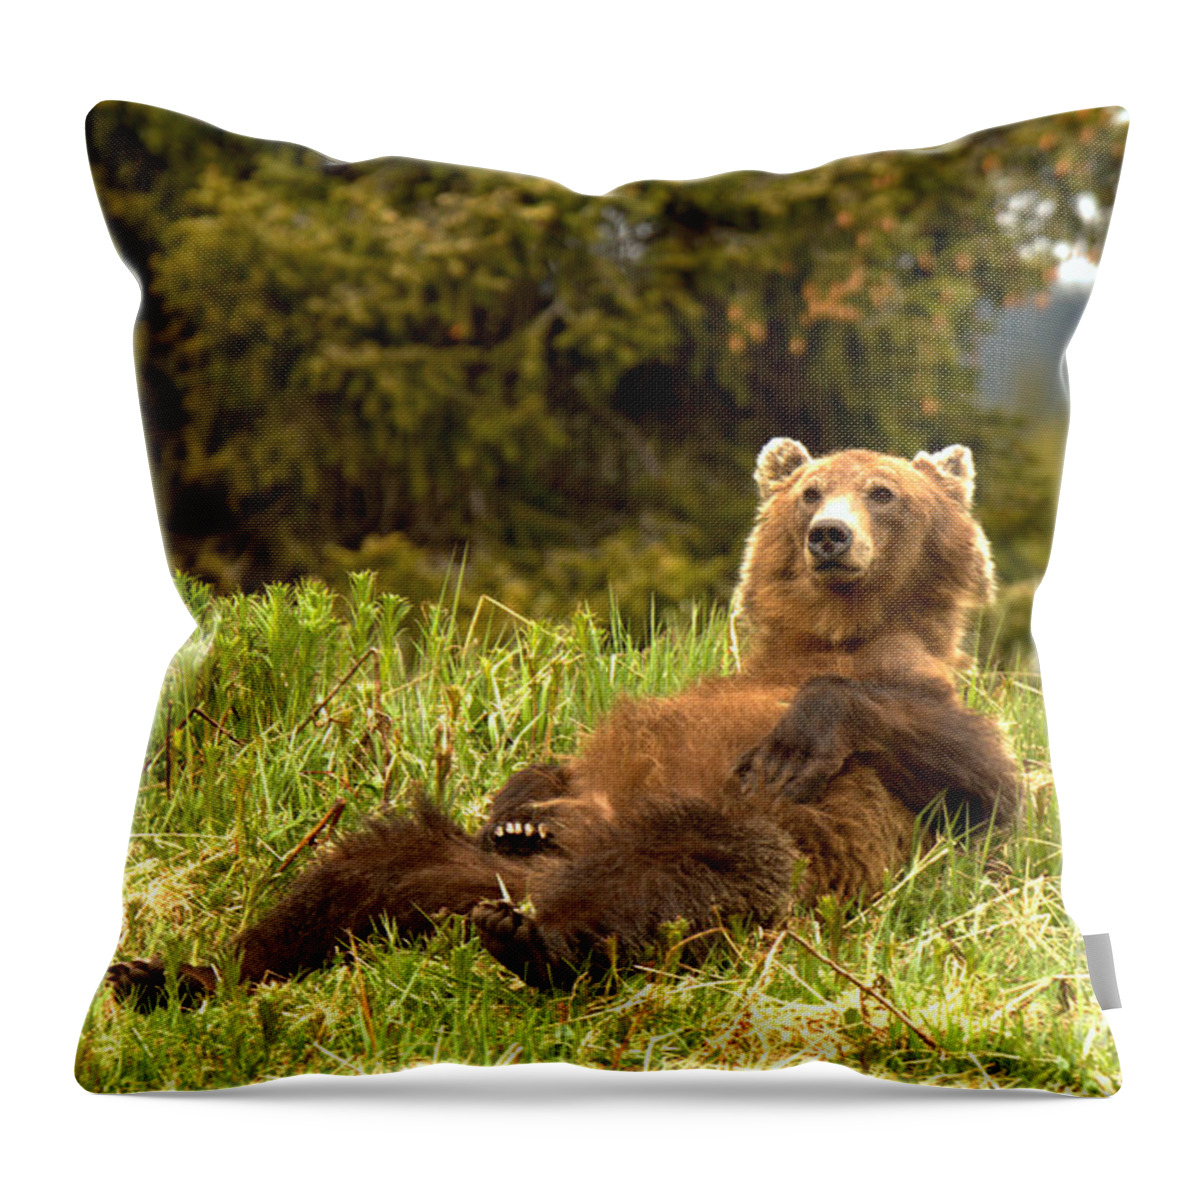 Grizzly Throw Pillow featuring the photograph Banff Grizzly Lounging In The Grass by Adam Jewell